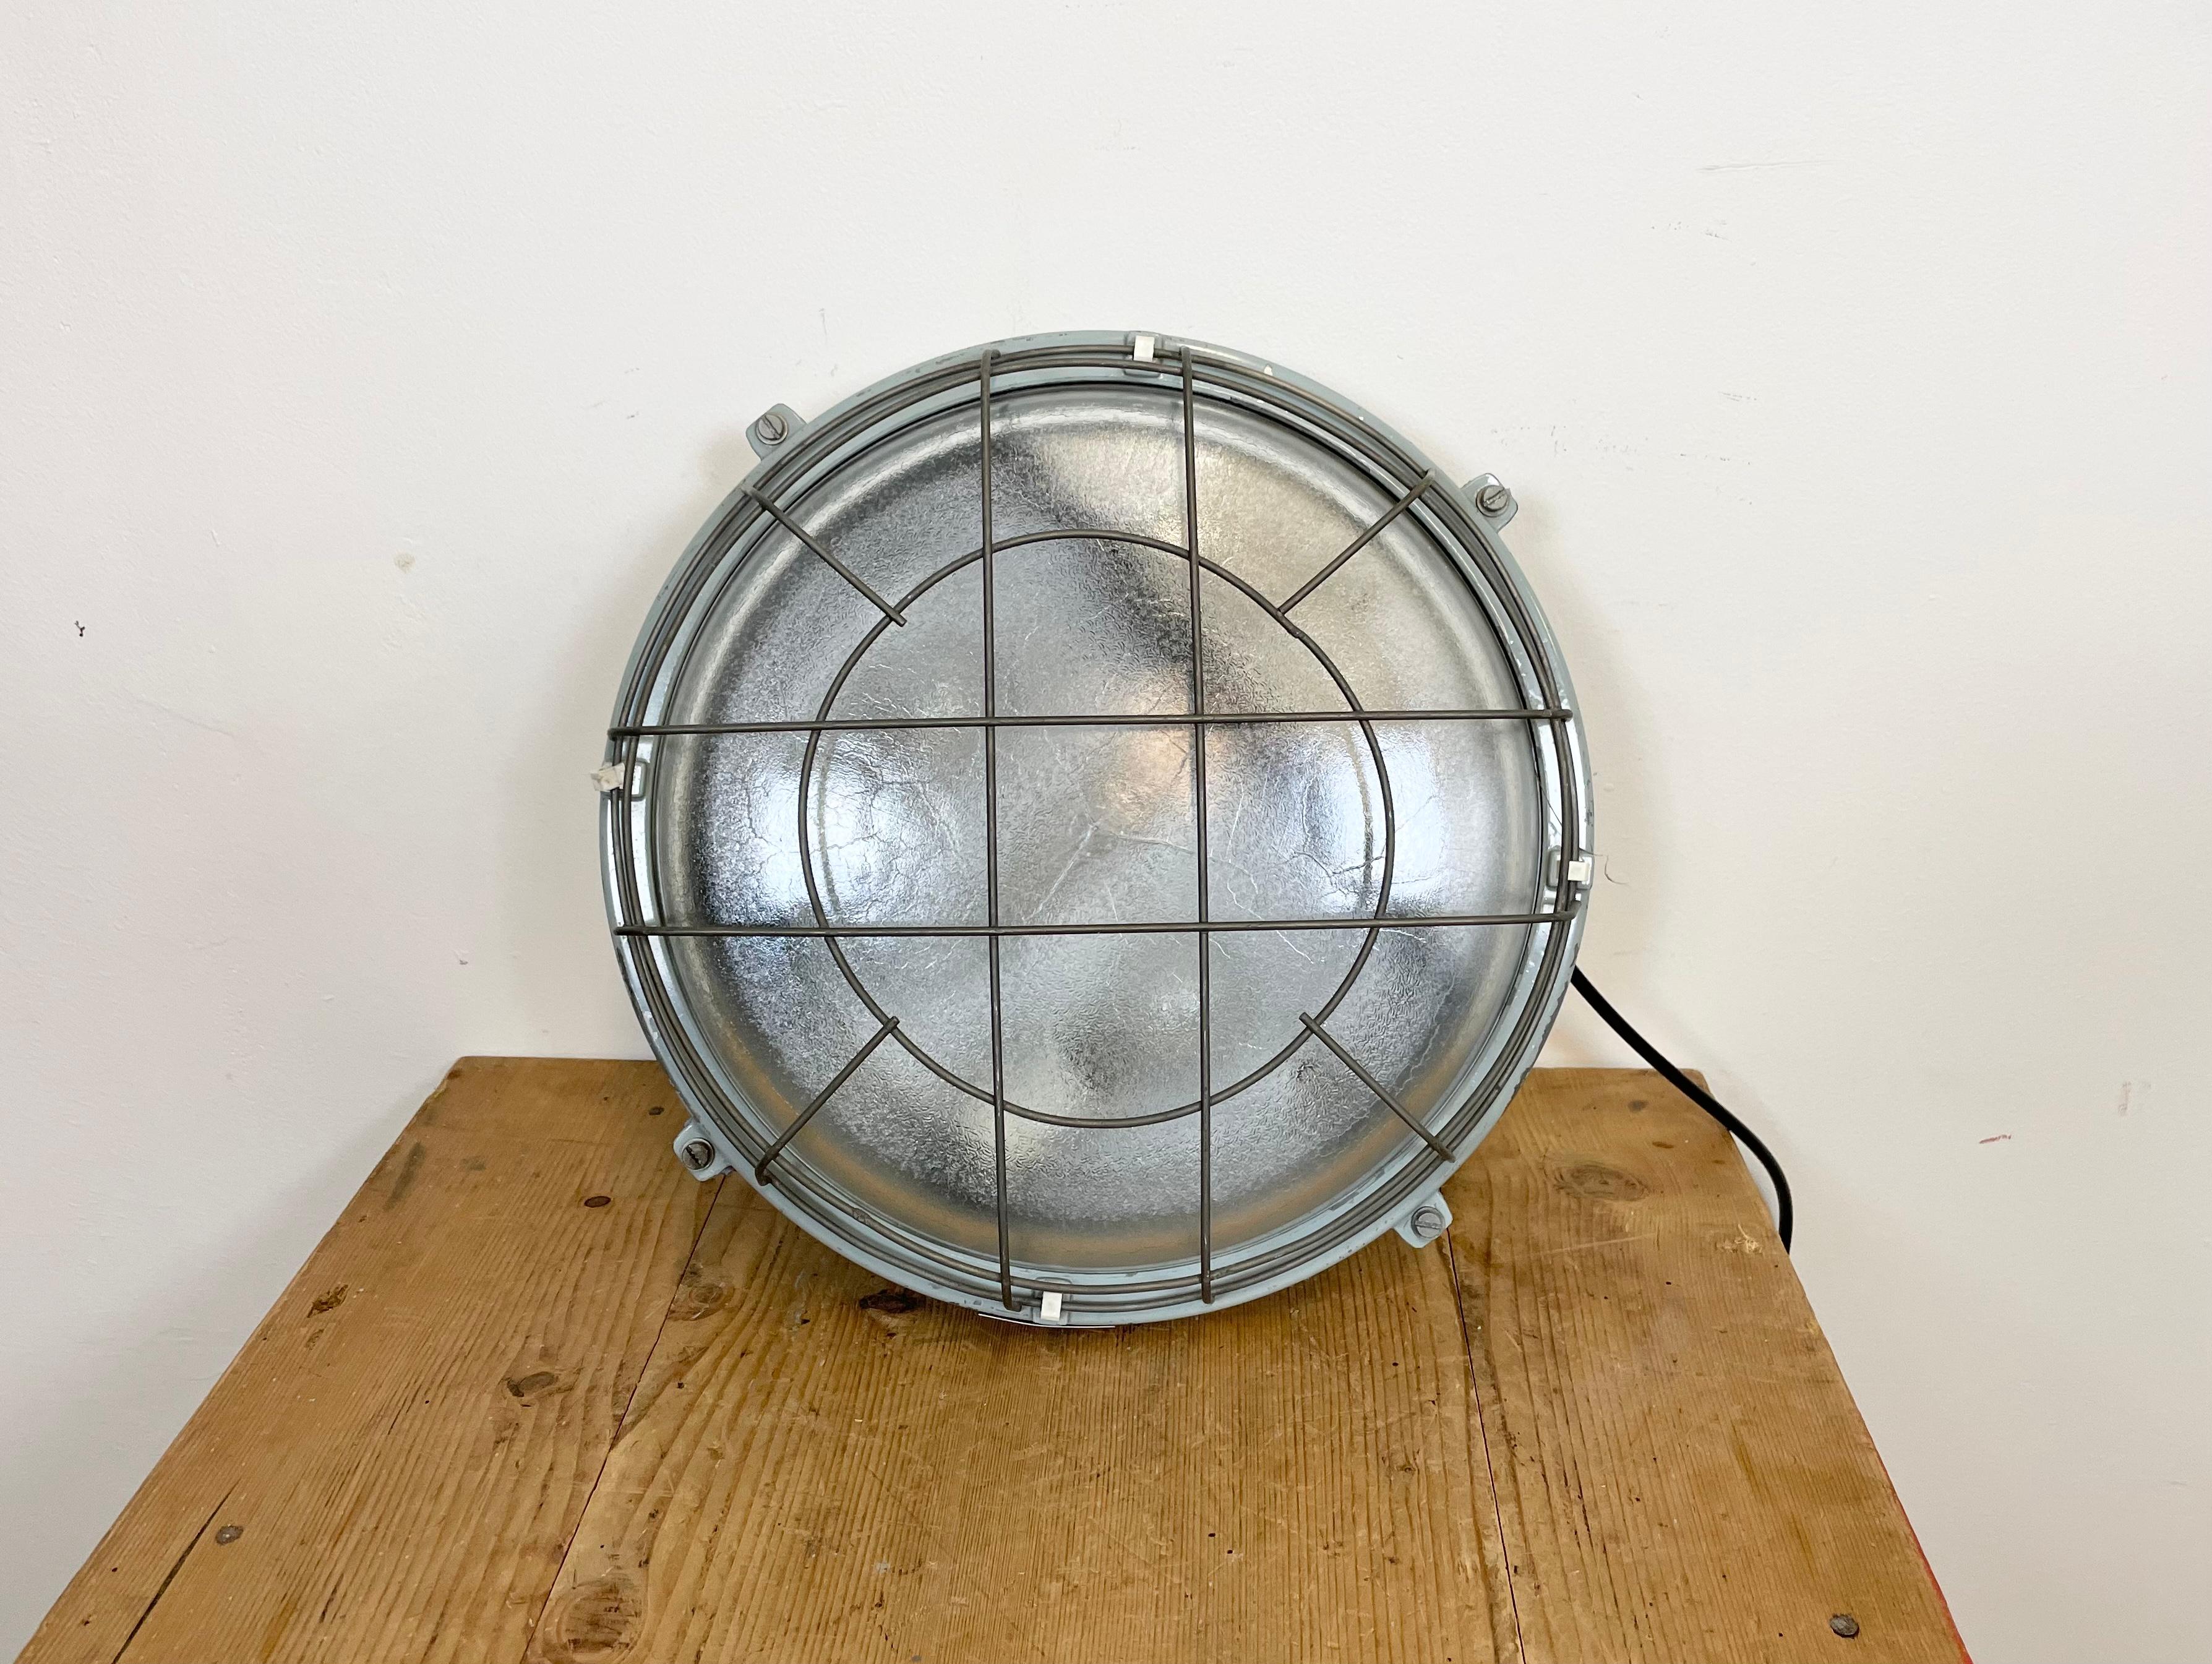 This grey cast aluminium wall lamp was made by Elektrosvit in former Czechoslovakia during the 1980s. . It fetures a cast aluminium body, frosted curved glass cover and iron grid. Two porcelain sockets require E 27 light bulbs. It can be also used